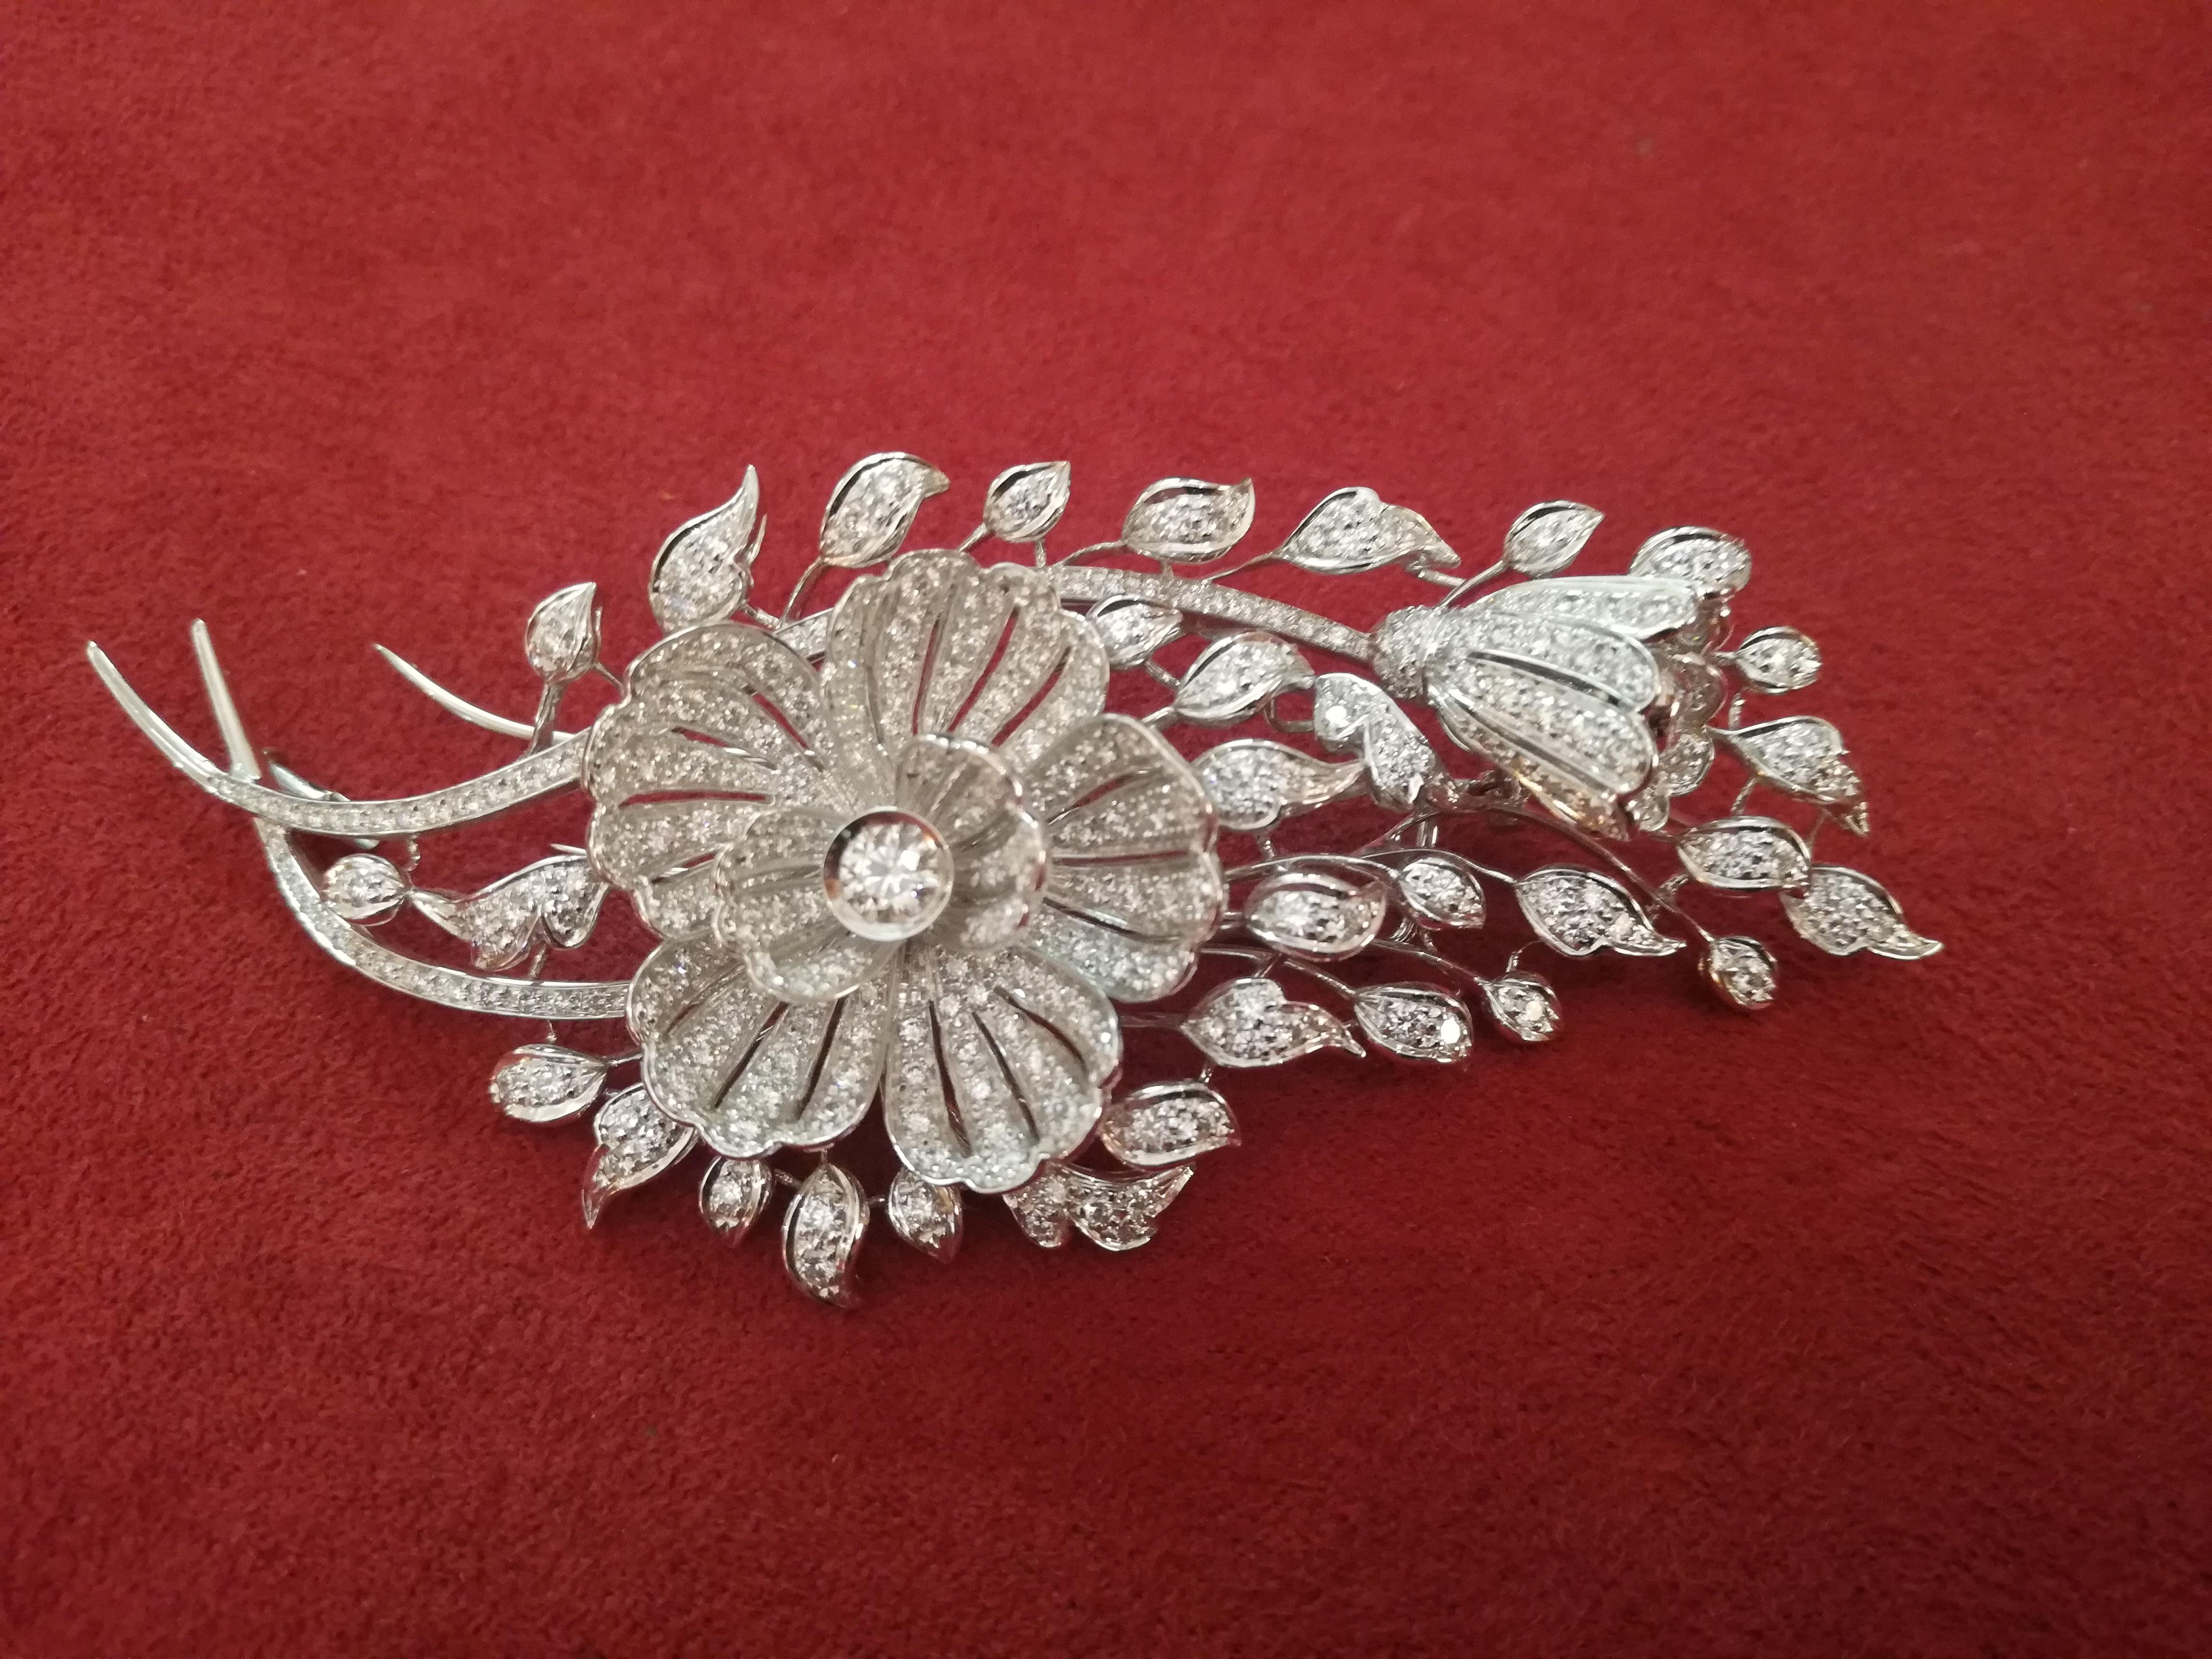 A beautiful Art Deco flower bouquet diamond brooch set in 18K white gold. Crafted entirely by hand this spectacular pin features a flower bouquet accented by diamonds. 

Total Diamond weight: 3.84ct
Diamond set in the centre of the flower: